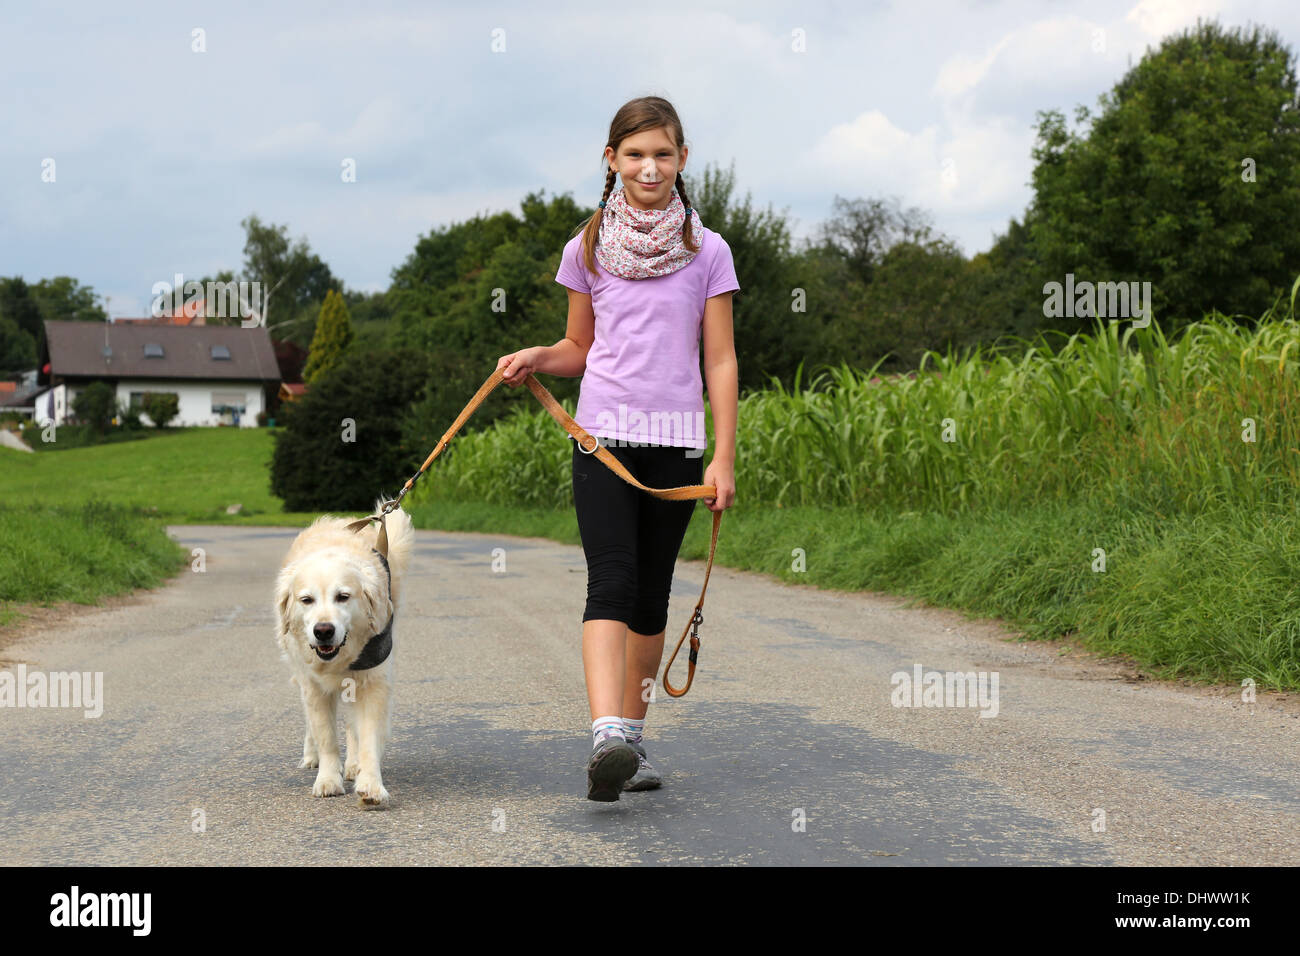 Little girl taking a dog for a walk outdoors in nature Stock Photo